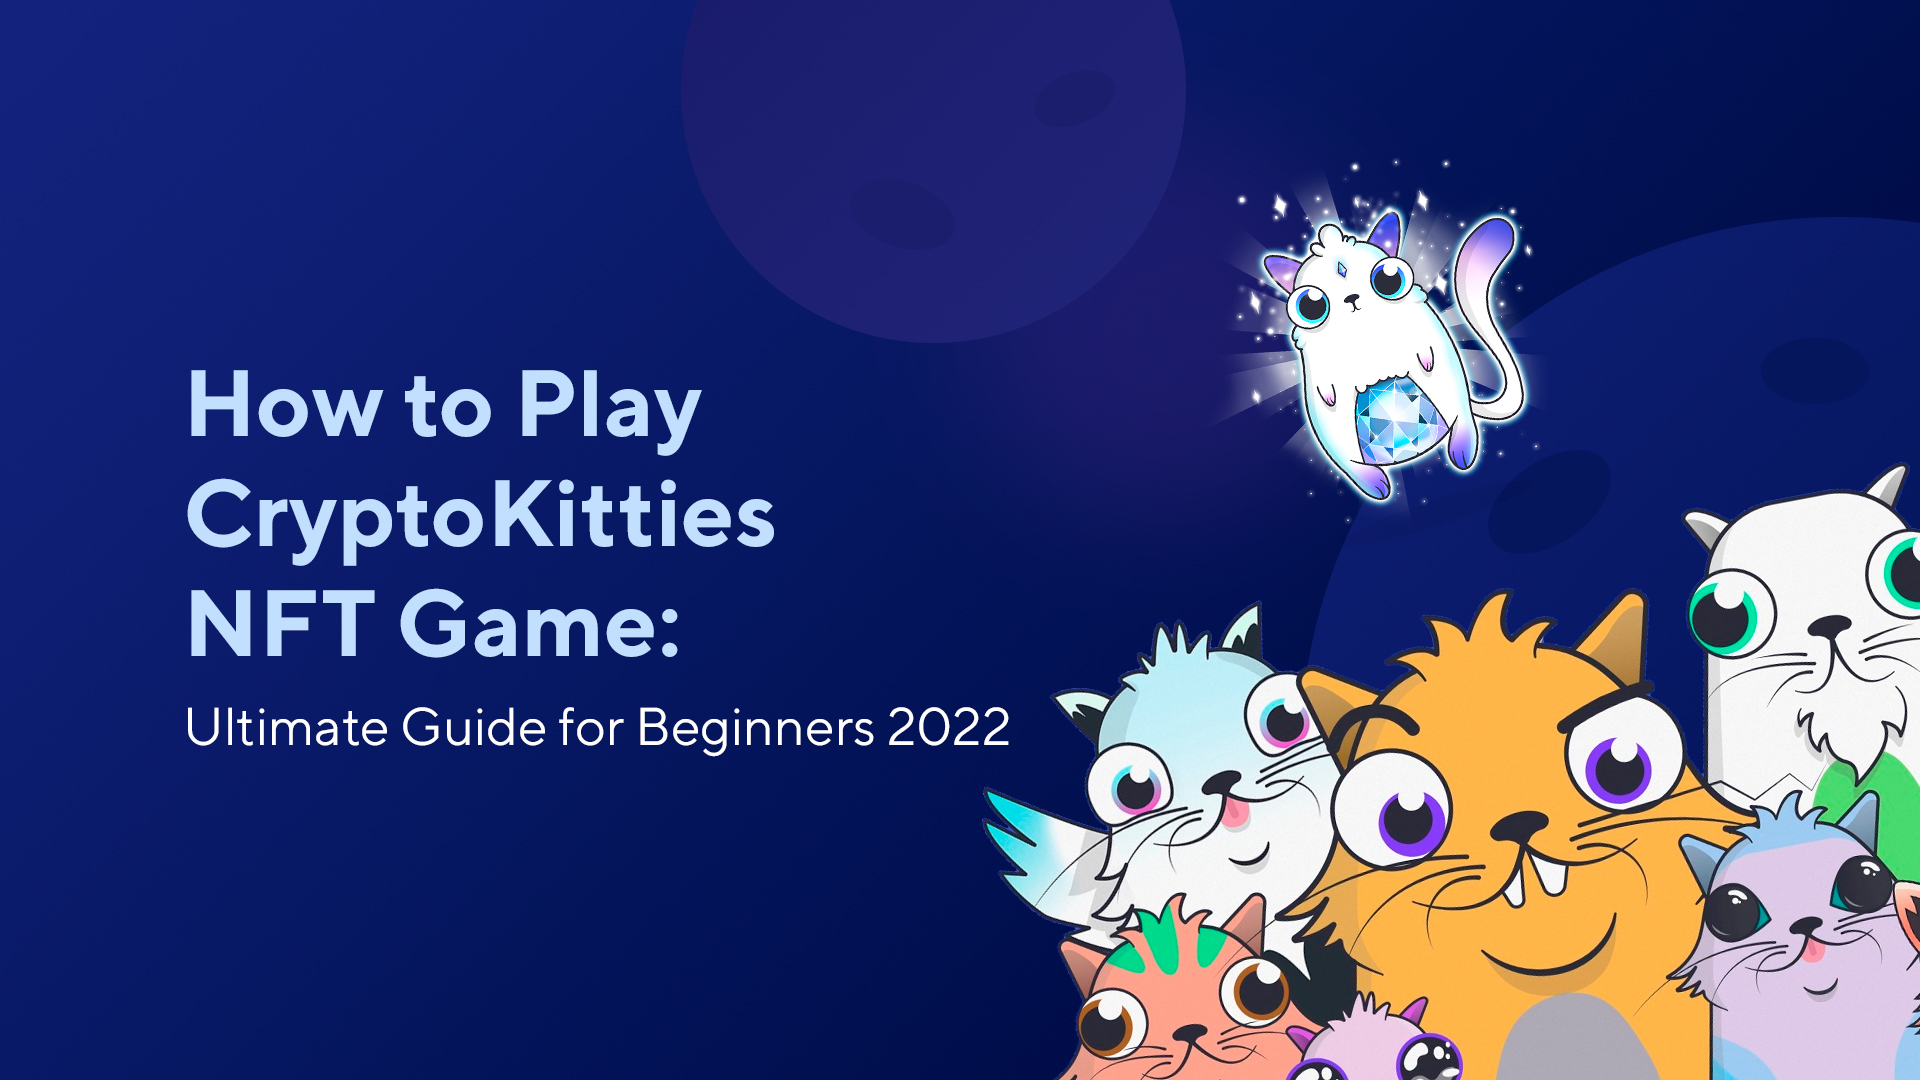 How to Play CryptoKitties NFT Game: Ultimate Guide for Beginners 2022